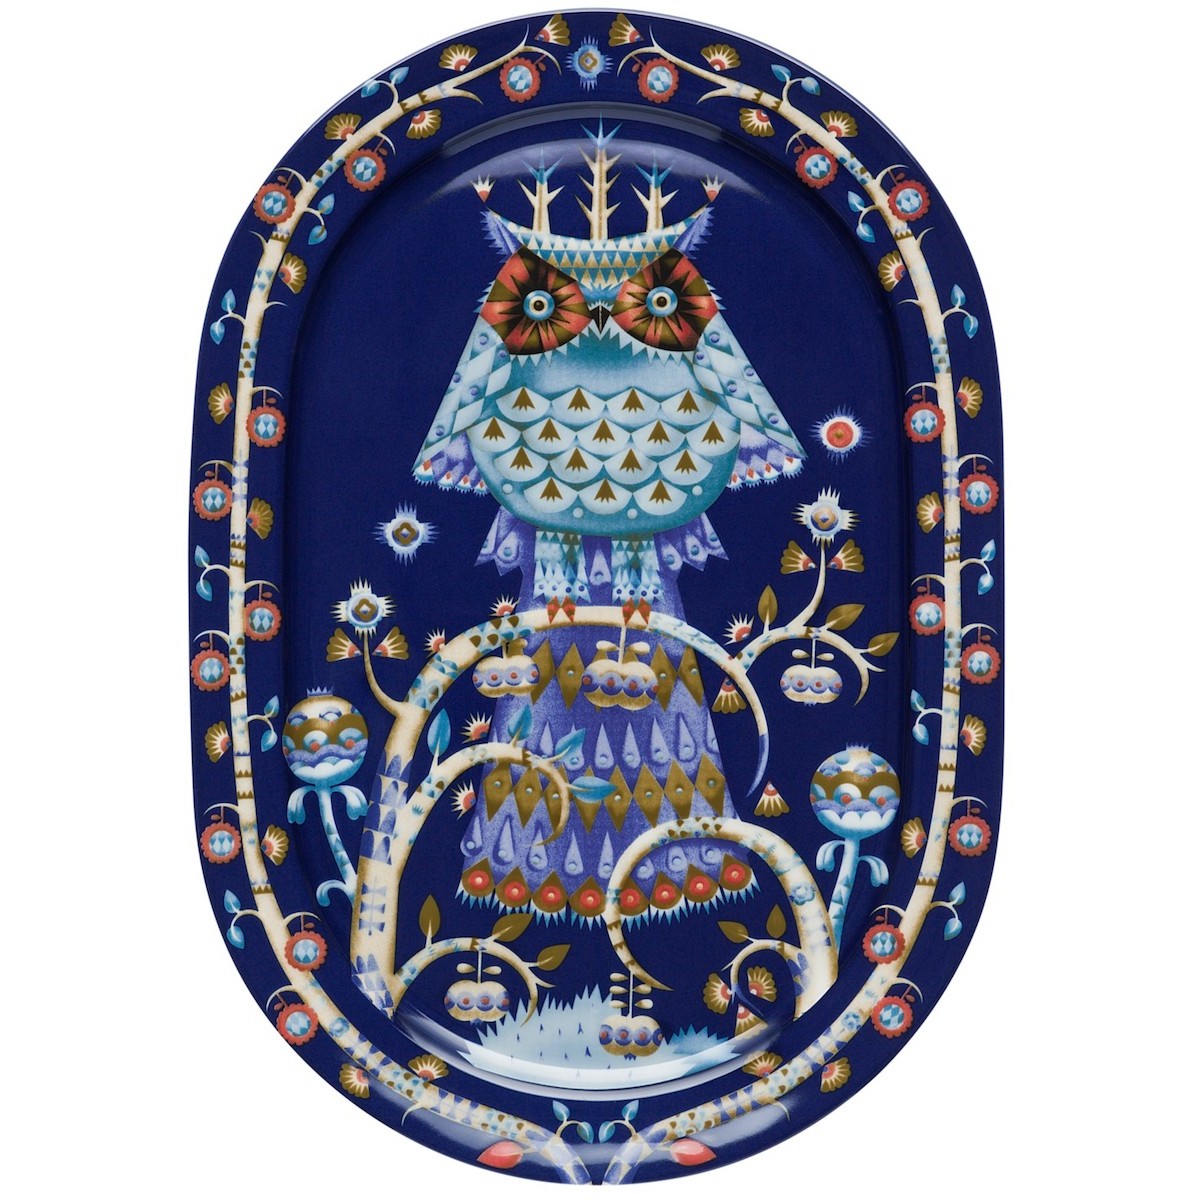 SOLD OUT - 41cm - Taika blue serving plate - 1011641